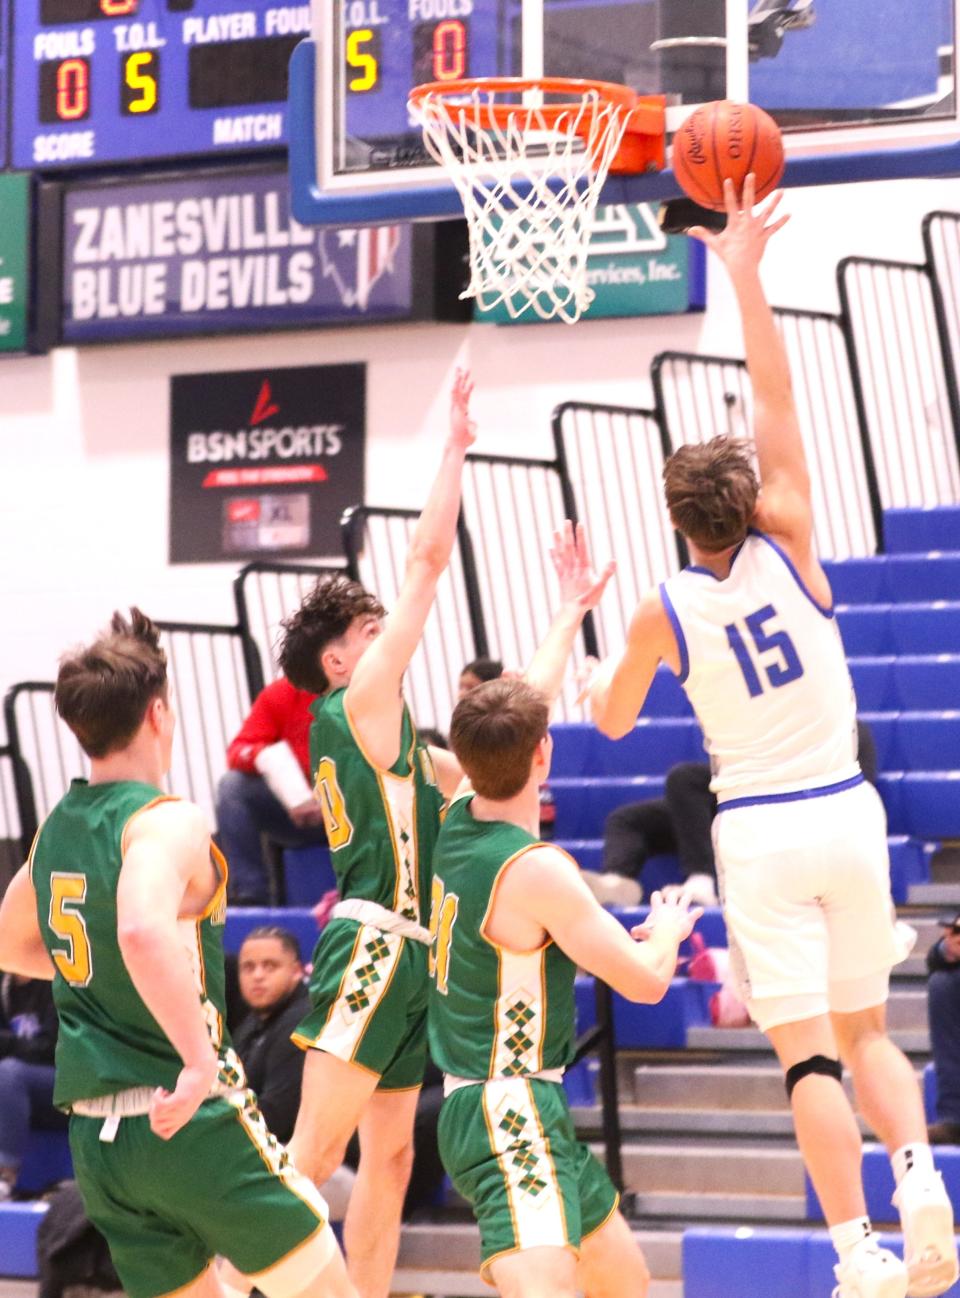 Zanesville's Maddox Hayes lays the ball in against Newark Catholic on Tuesday. The Blue Devils won 58-47.